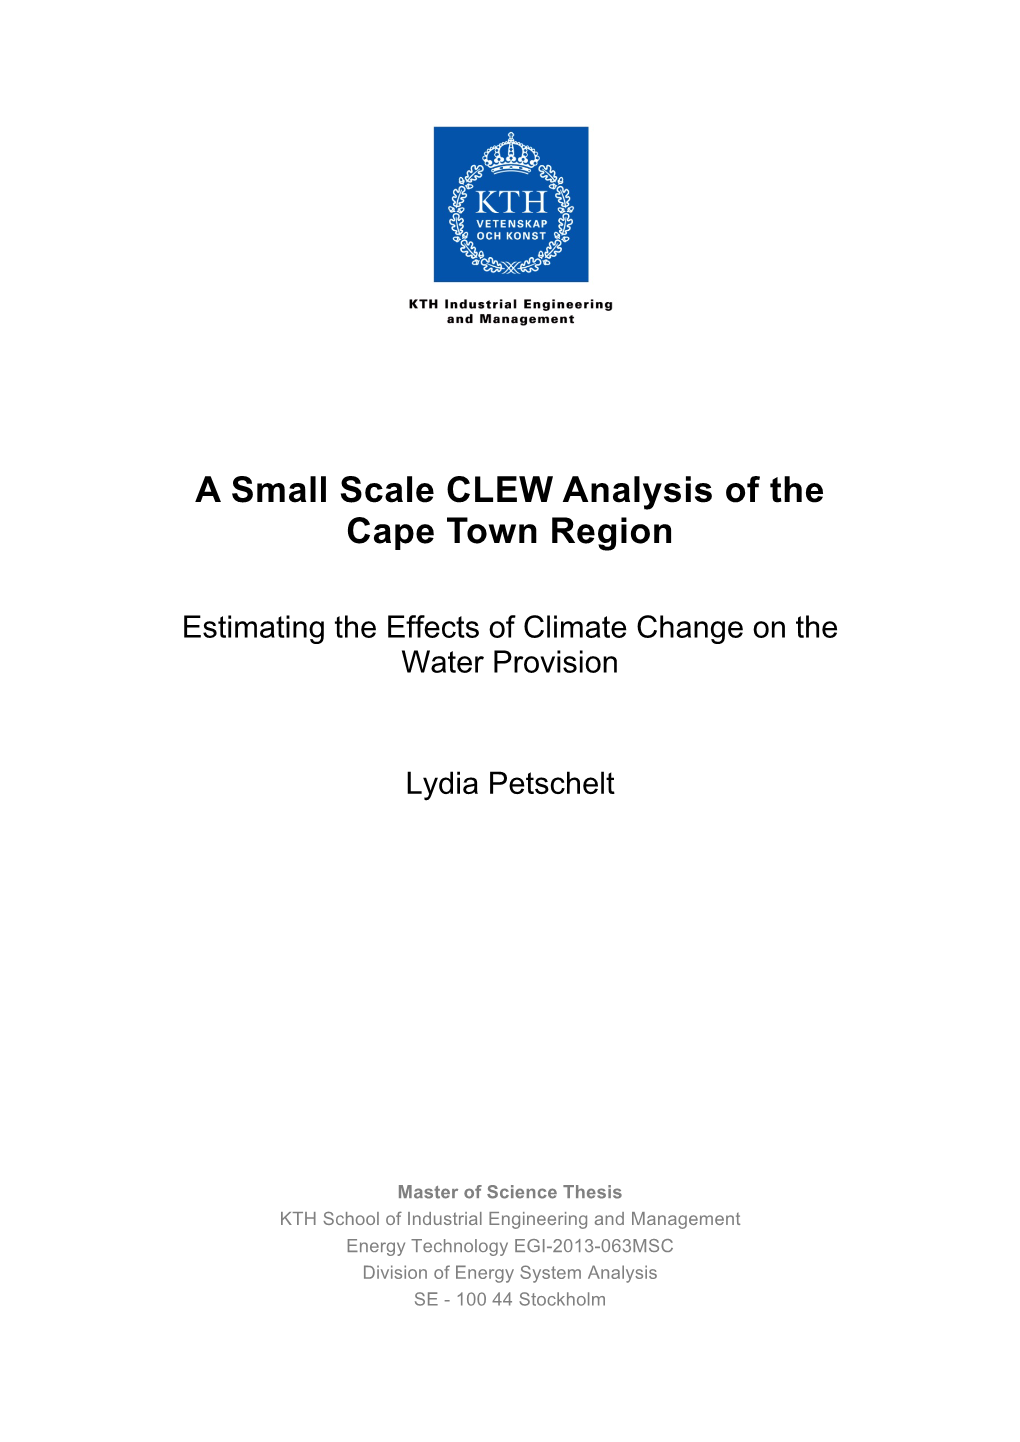 A Small Scale CLEW Analysis of the Cape Town Region